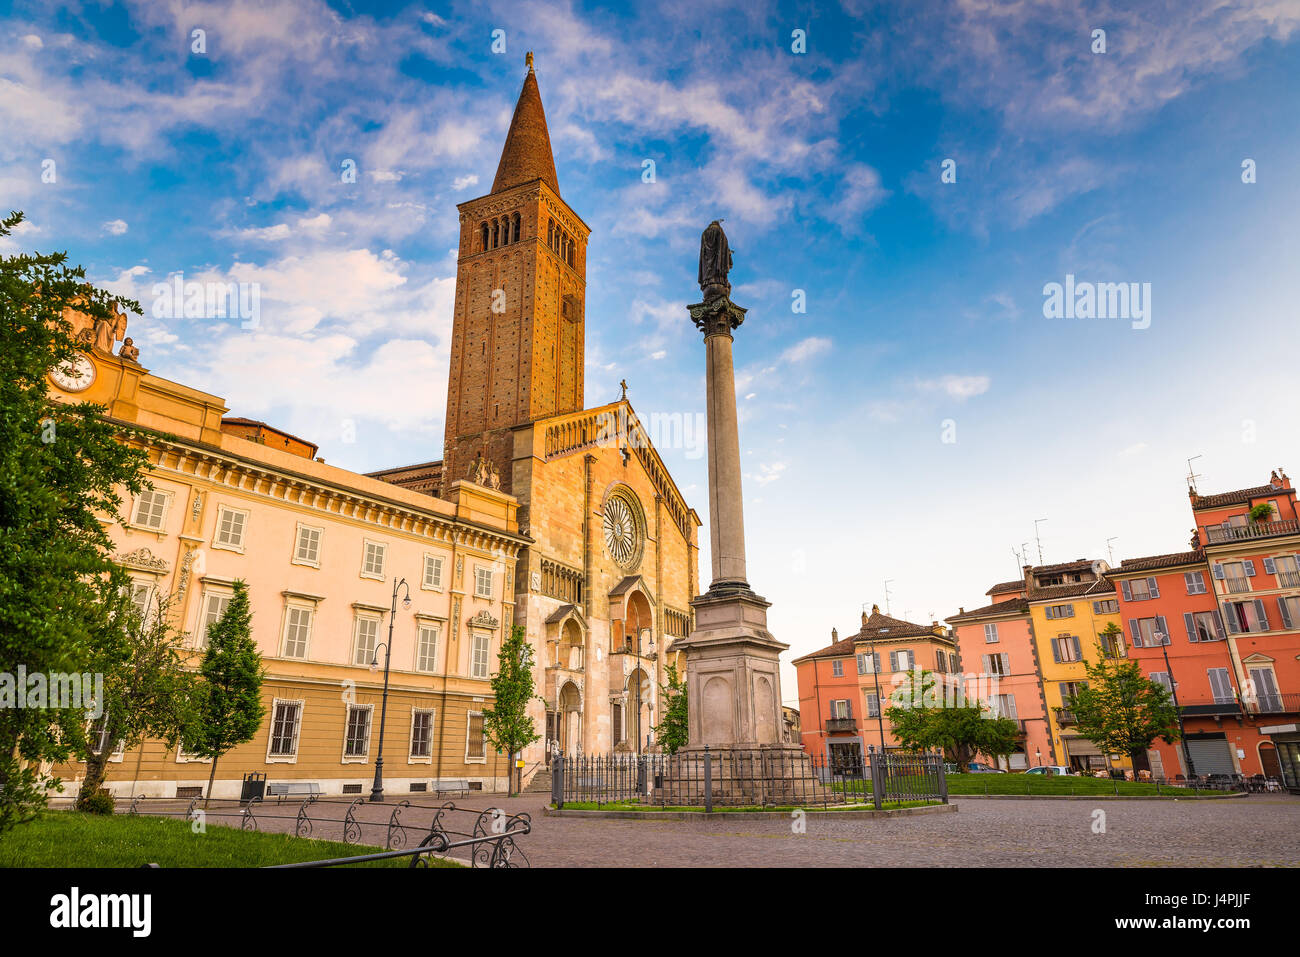 Piacenza, medieval town, Italy. Piazza Duomo in the city center with the cathedral of Santa Maria Assunta and Santa Giustina, warm light at sunset. Stock Photo